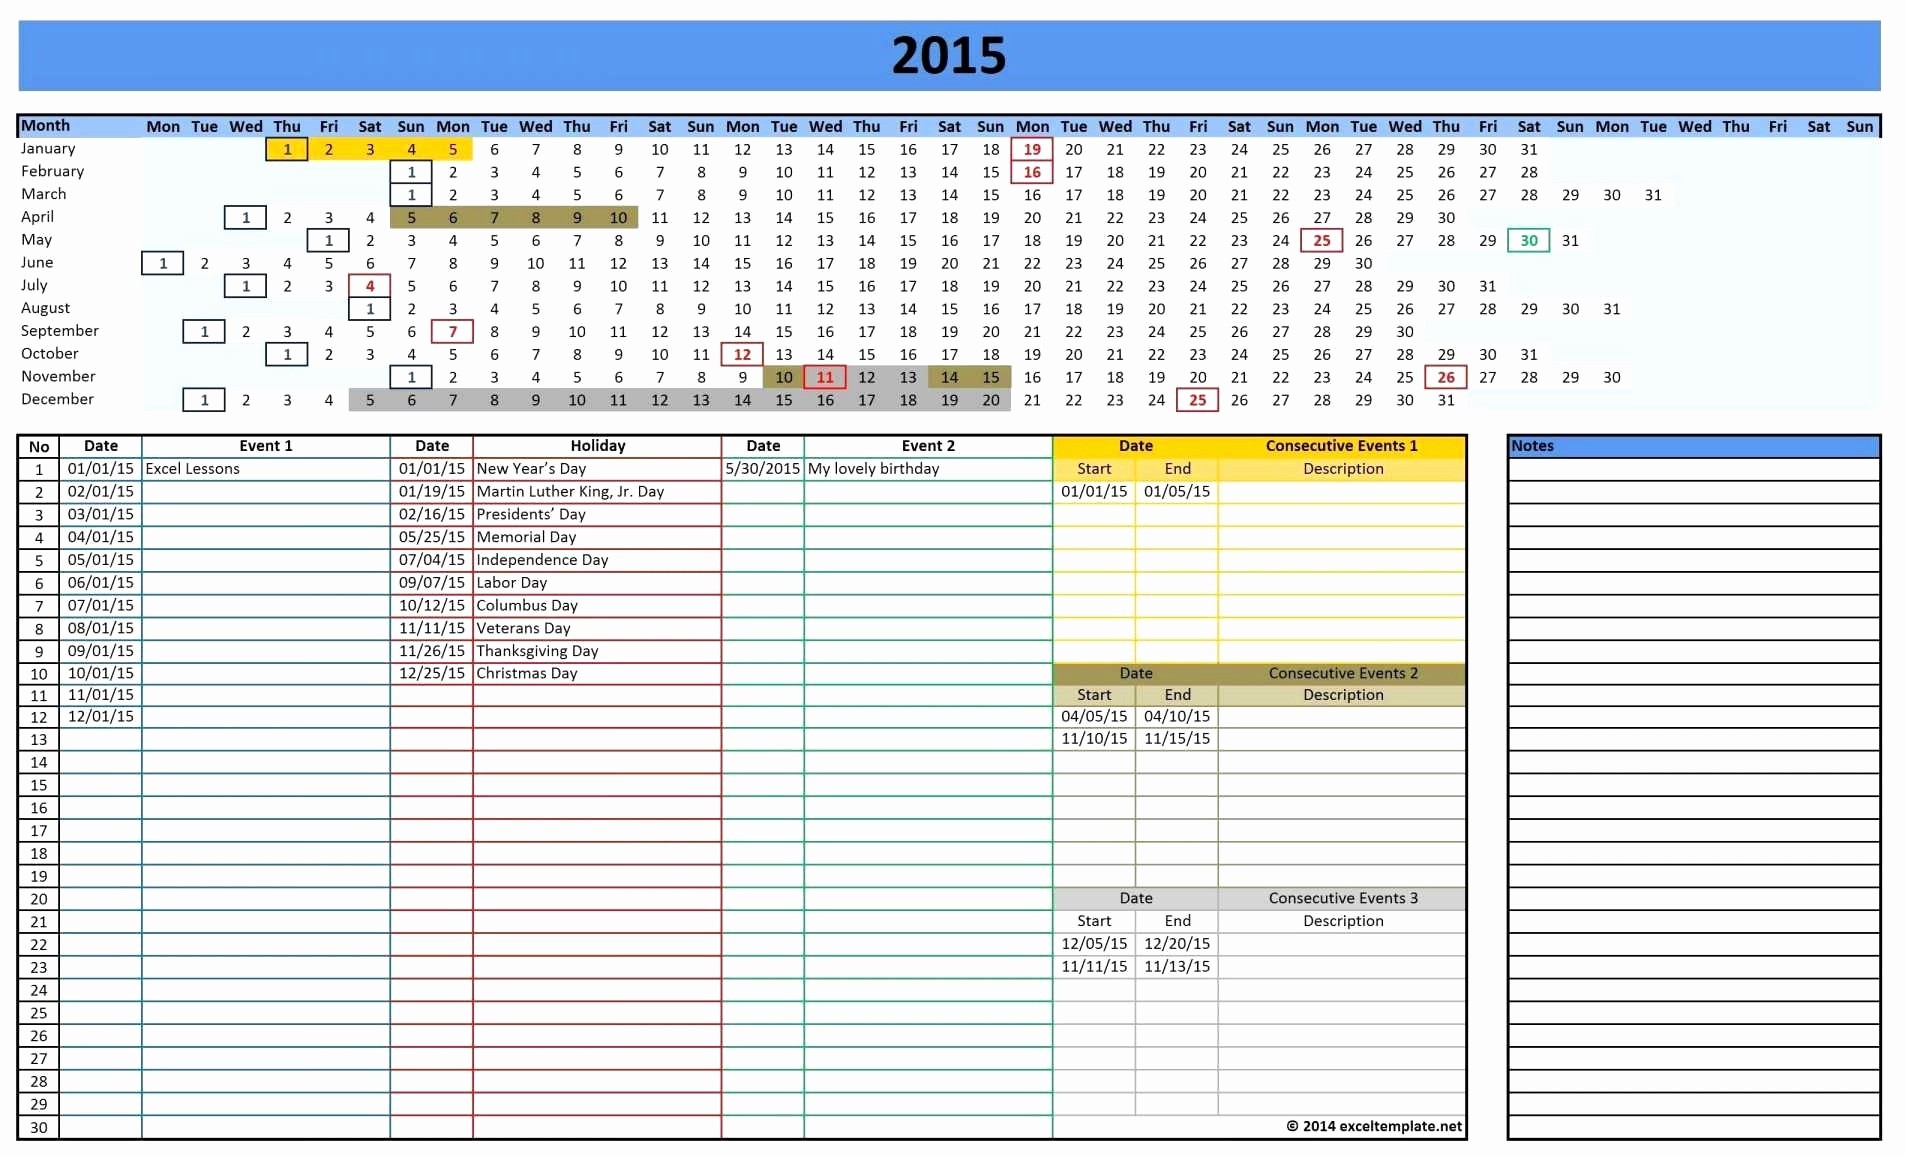 Google Sheets Gantt Chart Template New Awesome Document